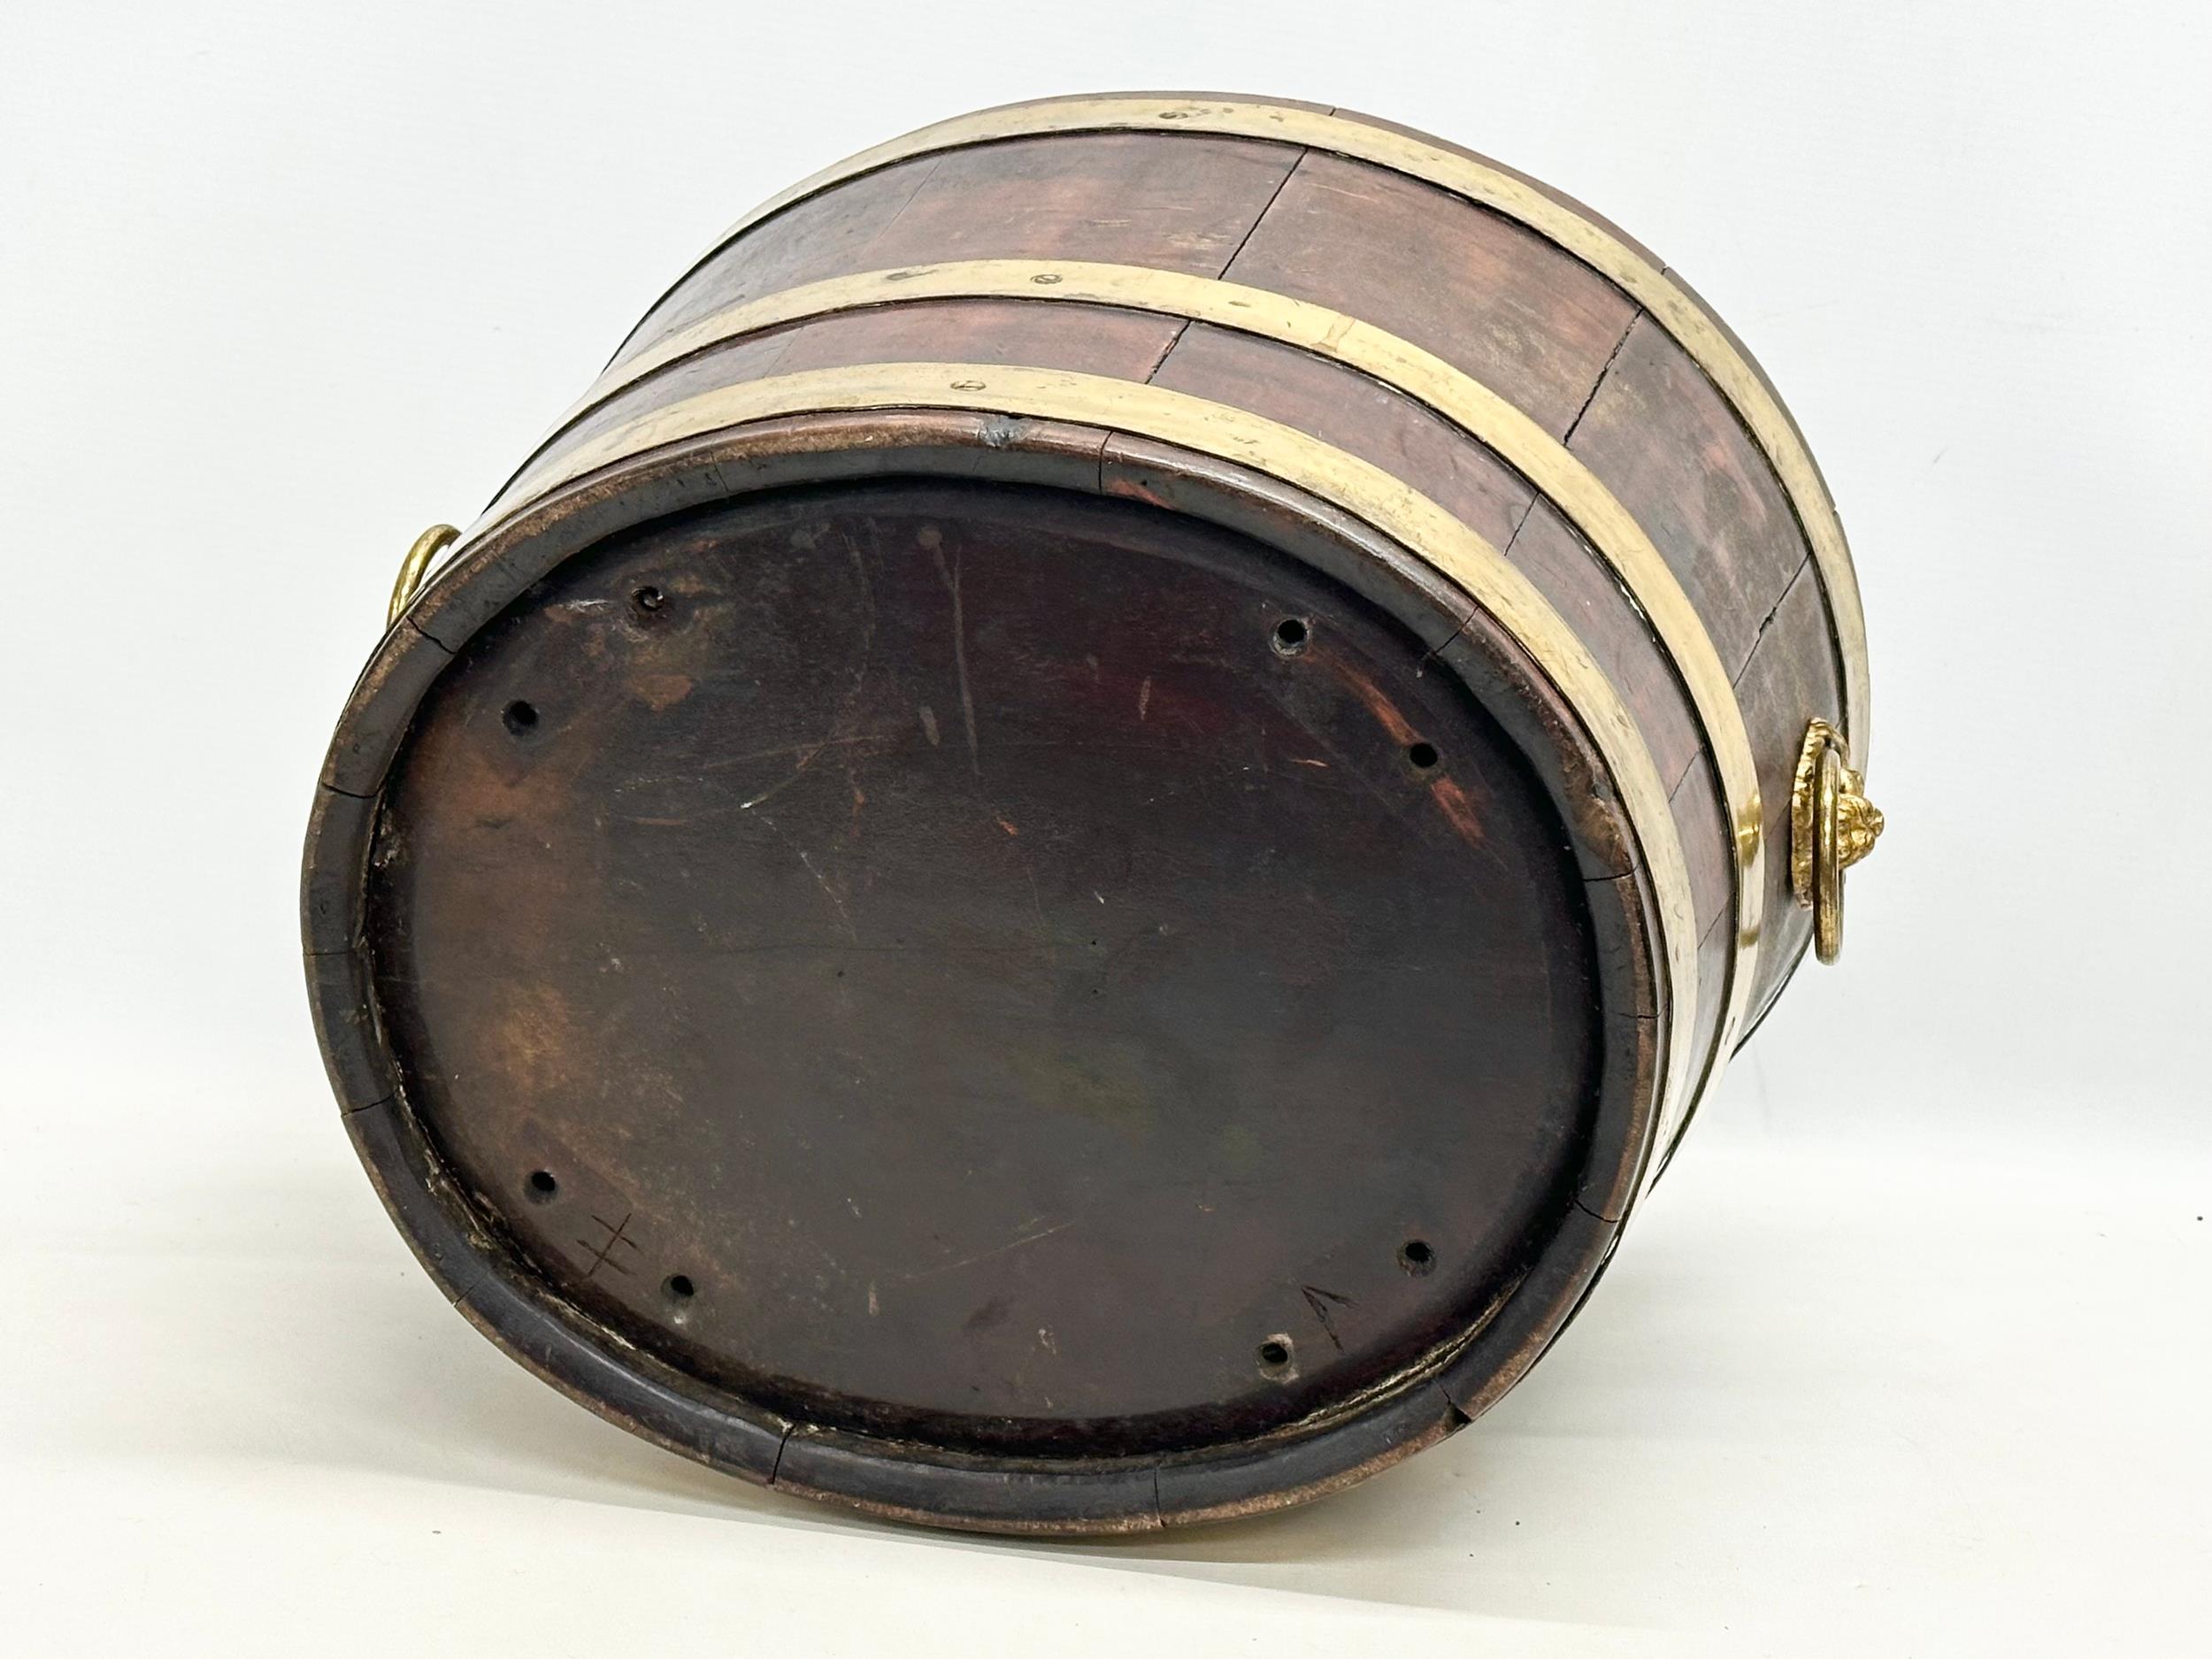 A George III brass bound wine cooler with lion ring handles and original liner. Circa 1780-1790. - Image 3 of 3